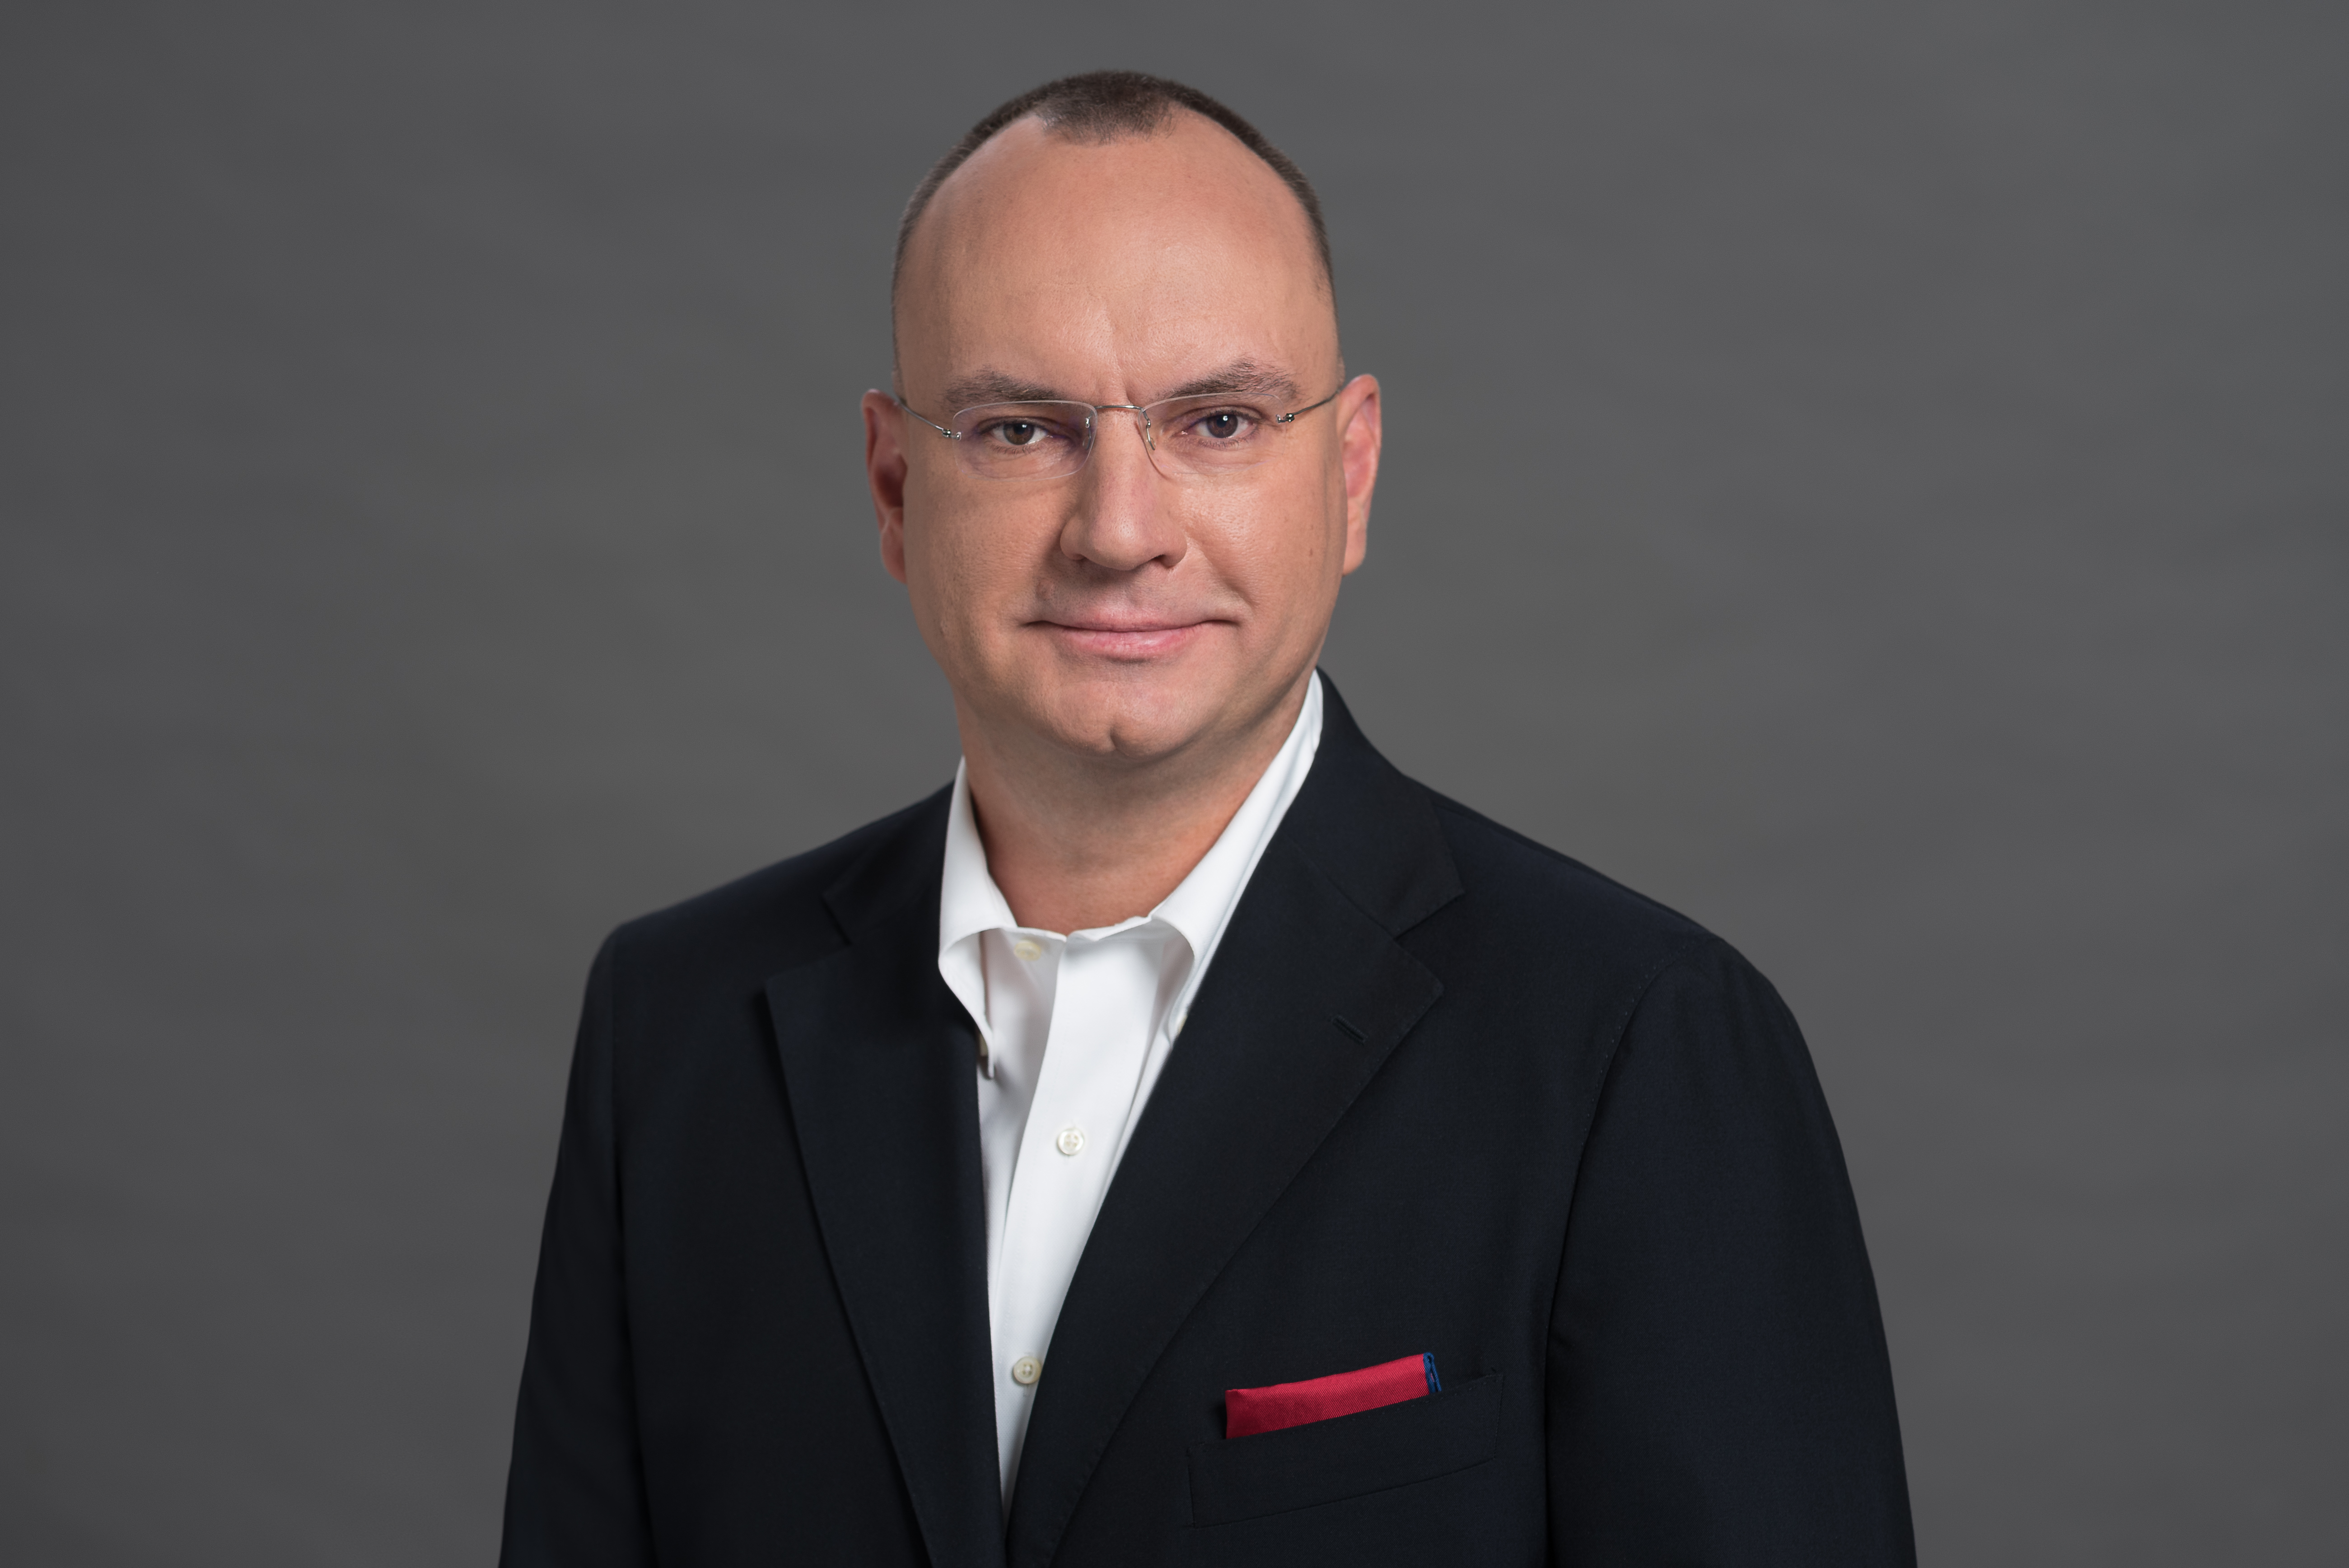 Robert Stupak is the new marketing and e-commerce director at Carrefour Polska